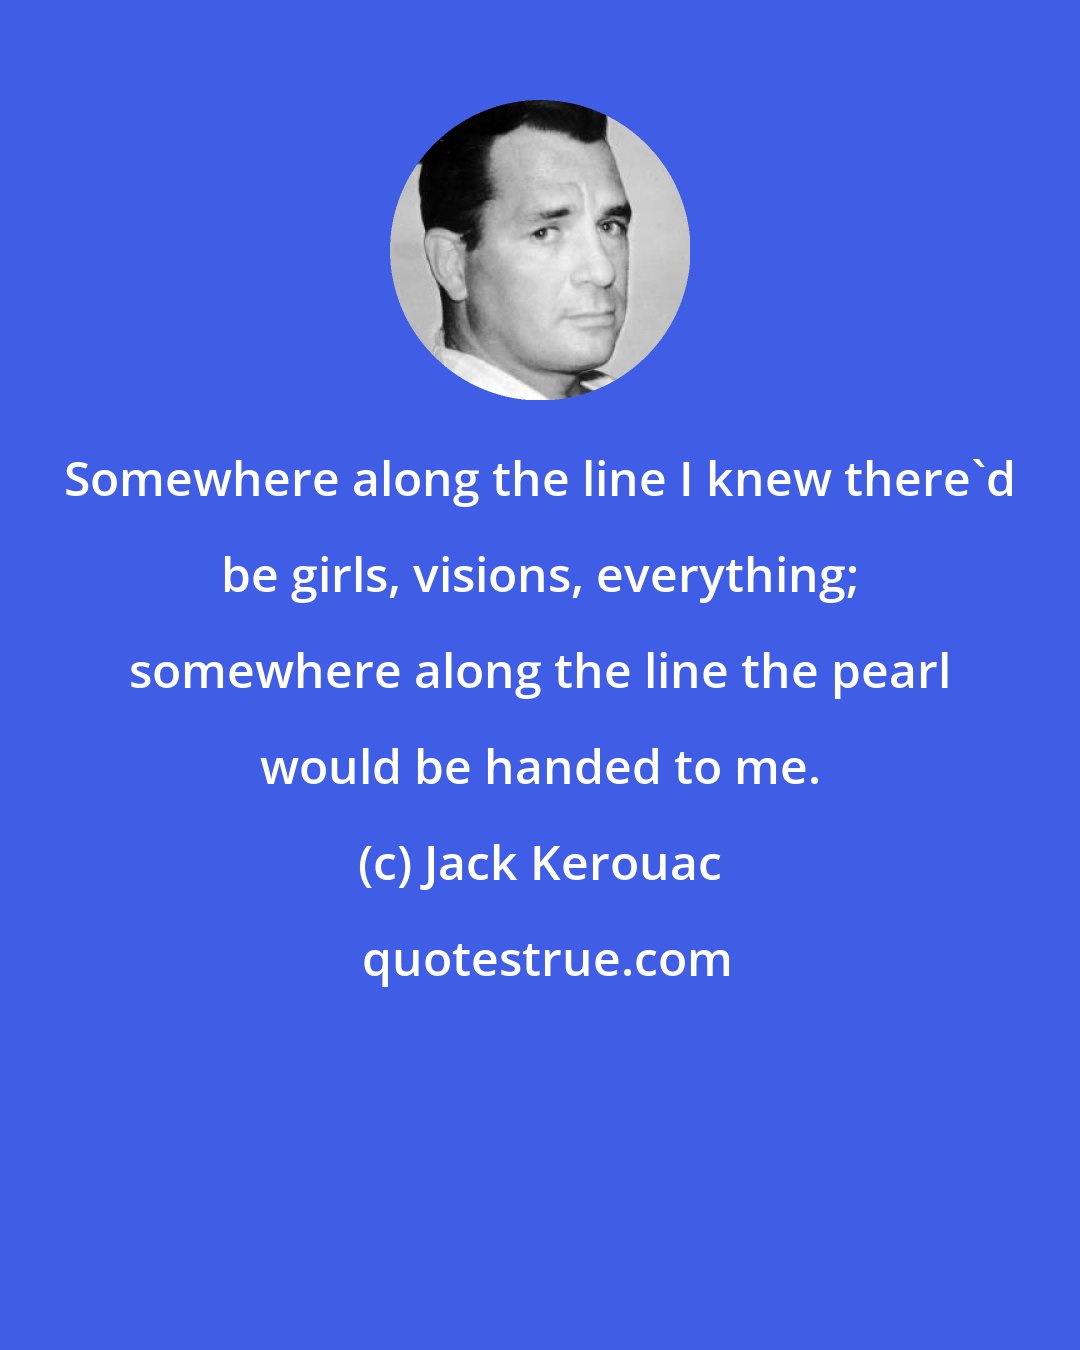 Jack Kerouac: Somewhere along the line I knew there'd be girls, visions, everything; somewhere along the line the pearl would be handed to me.